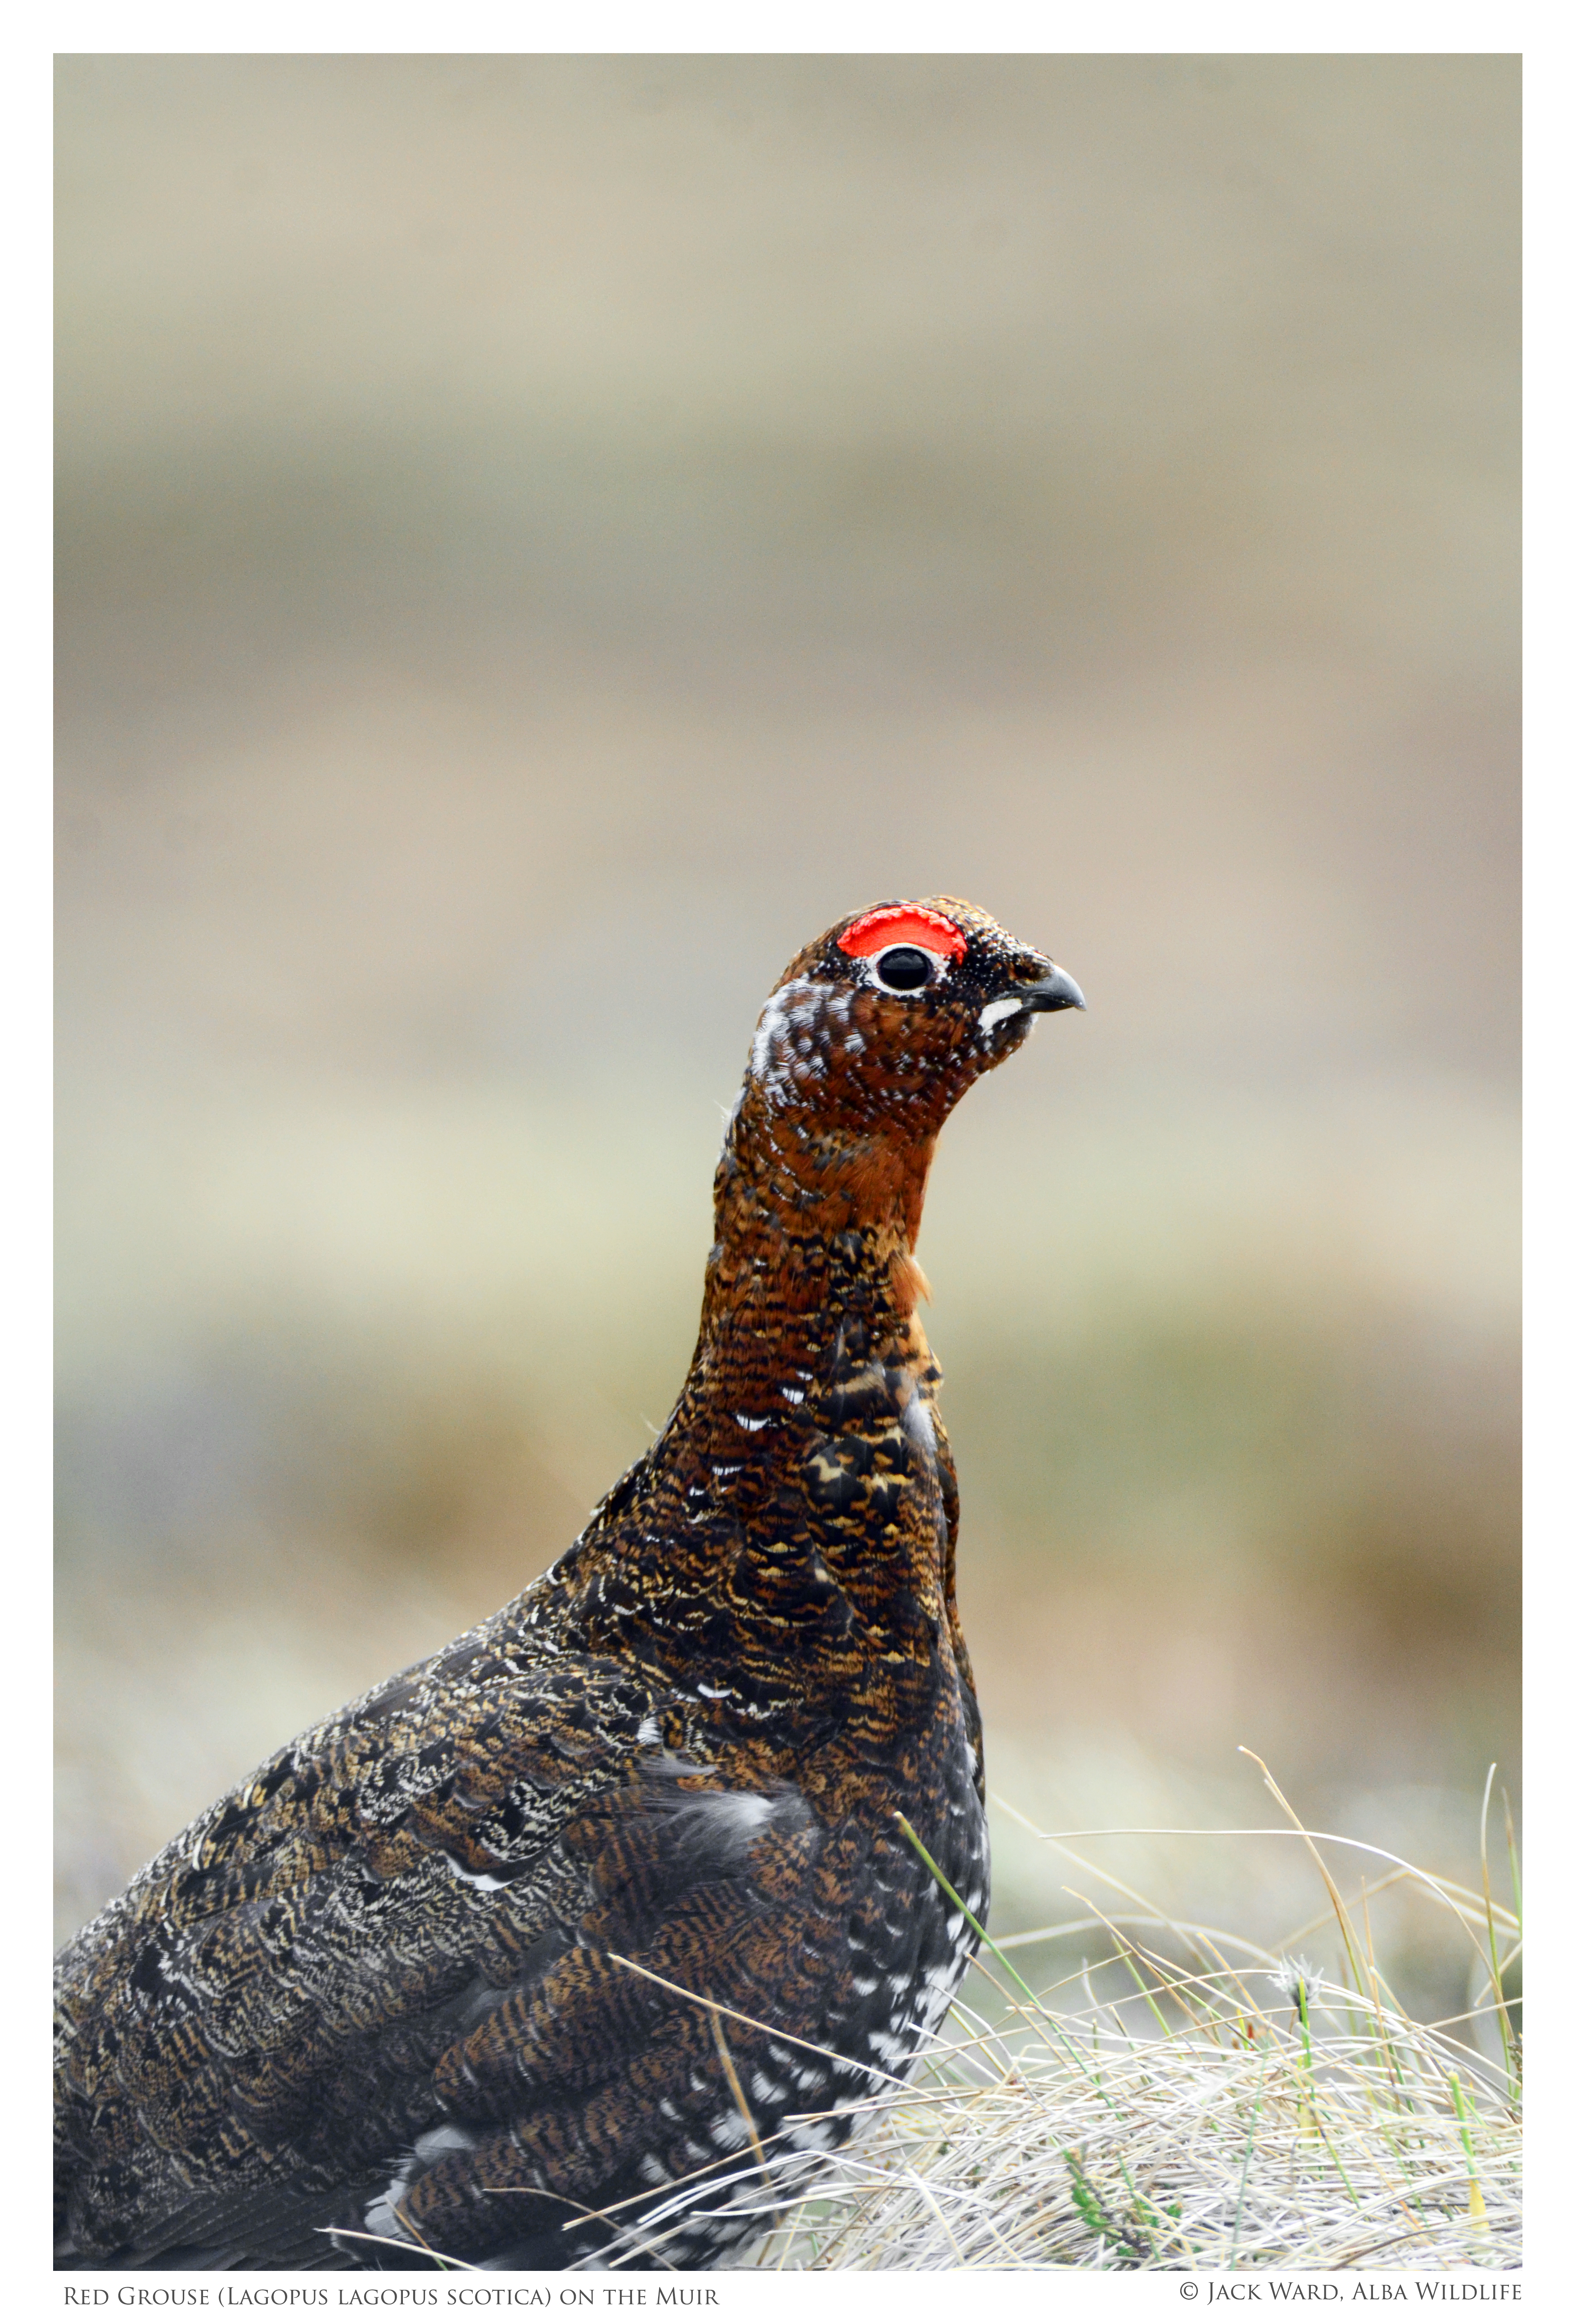 Red Grouse on the Muir.jpg